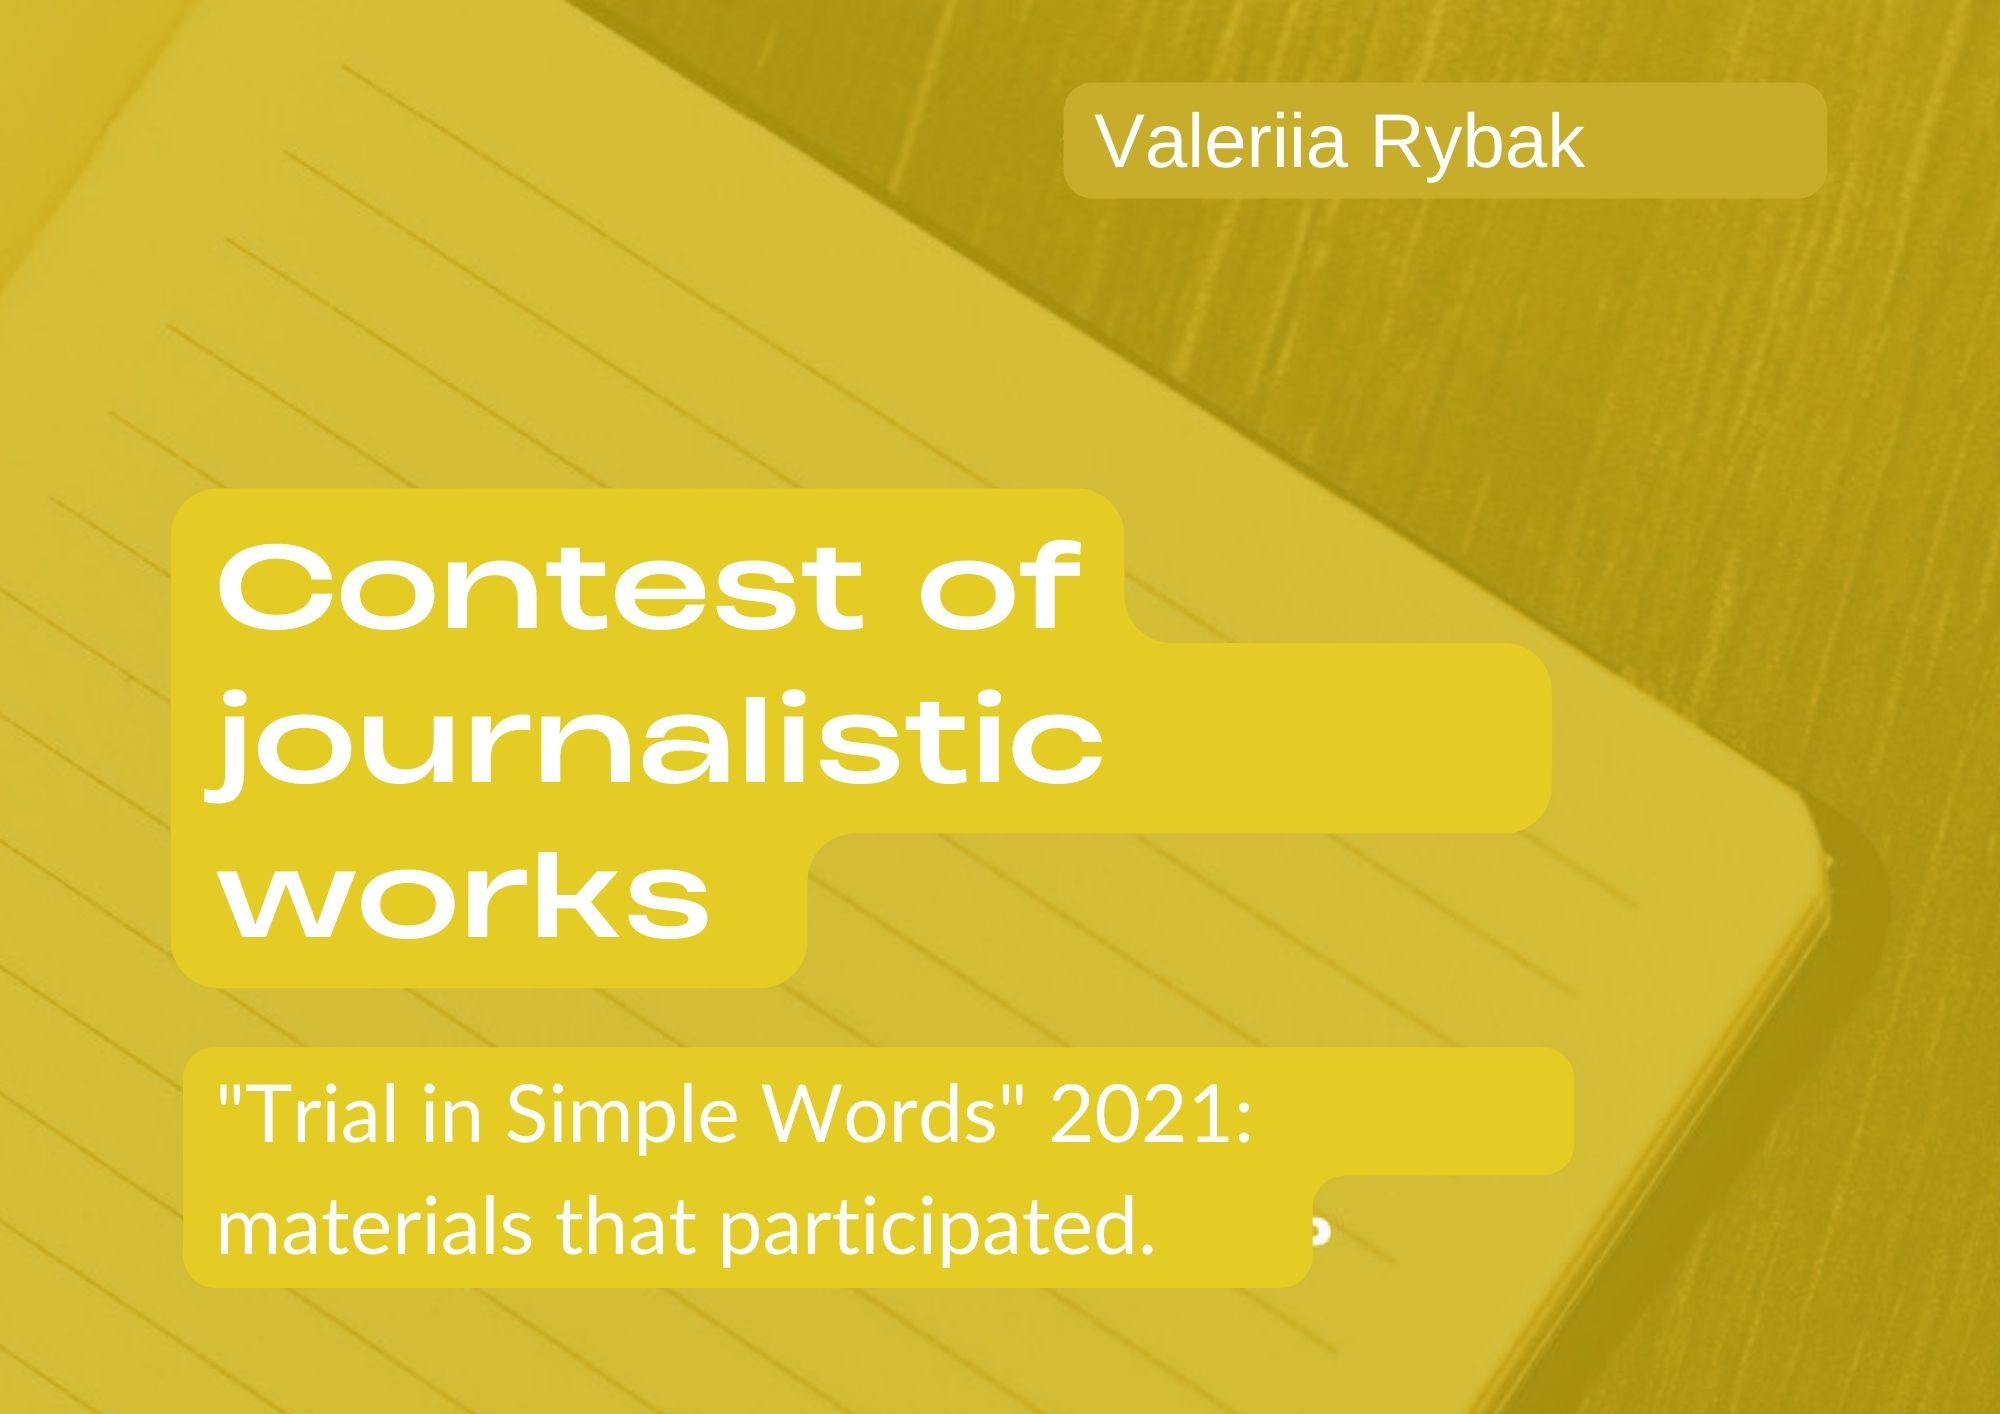 Contest of journalistic works "Trial in Simple Words" 2021: participating materials